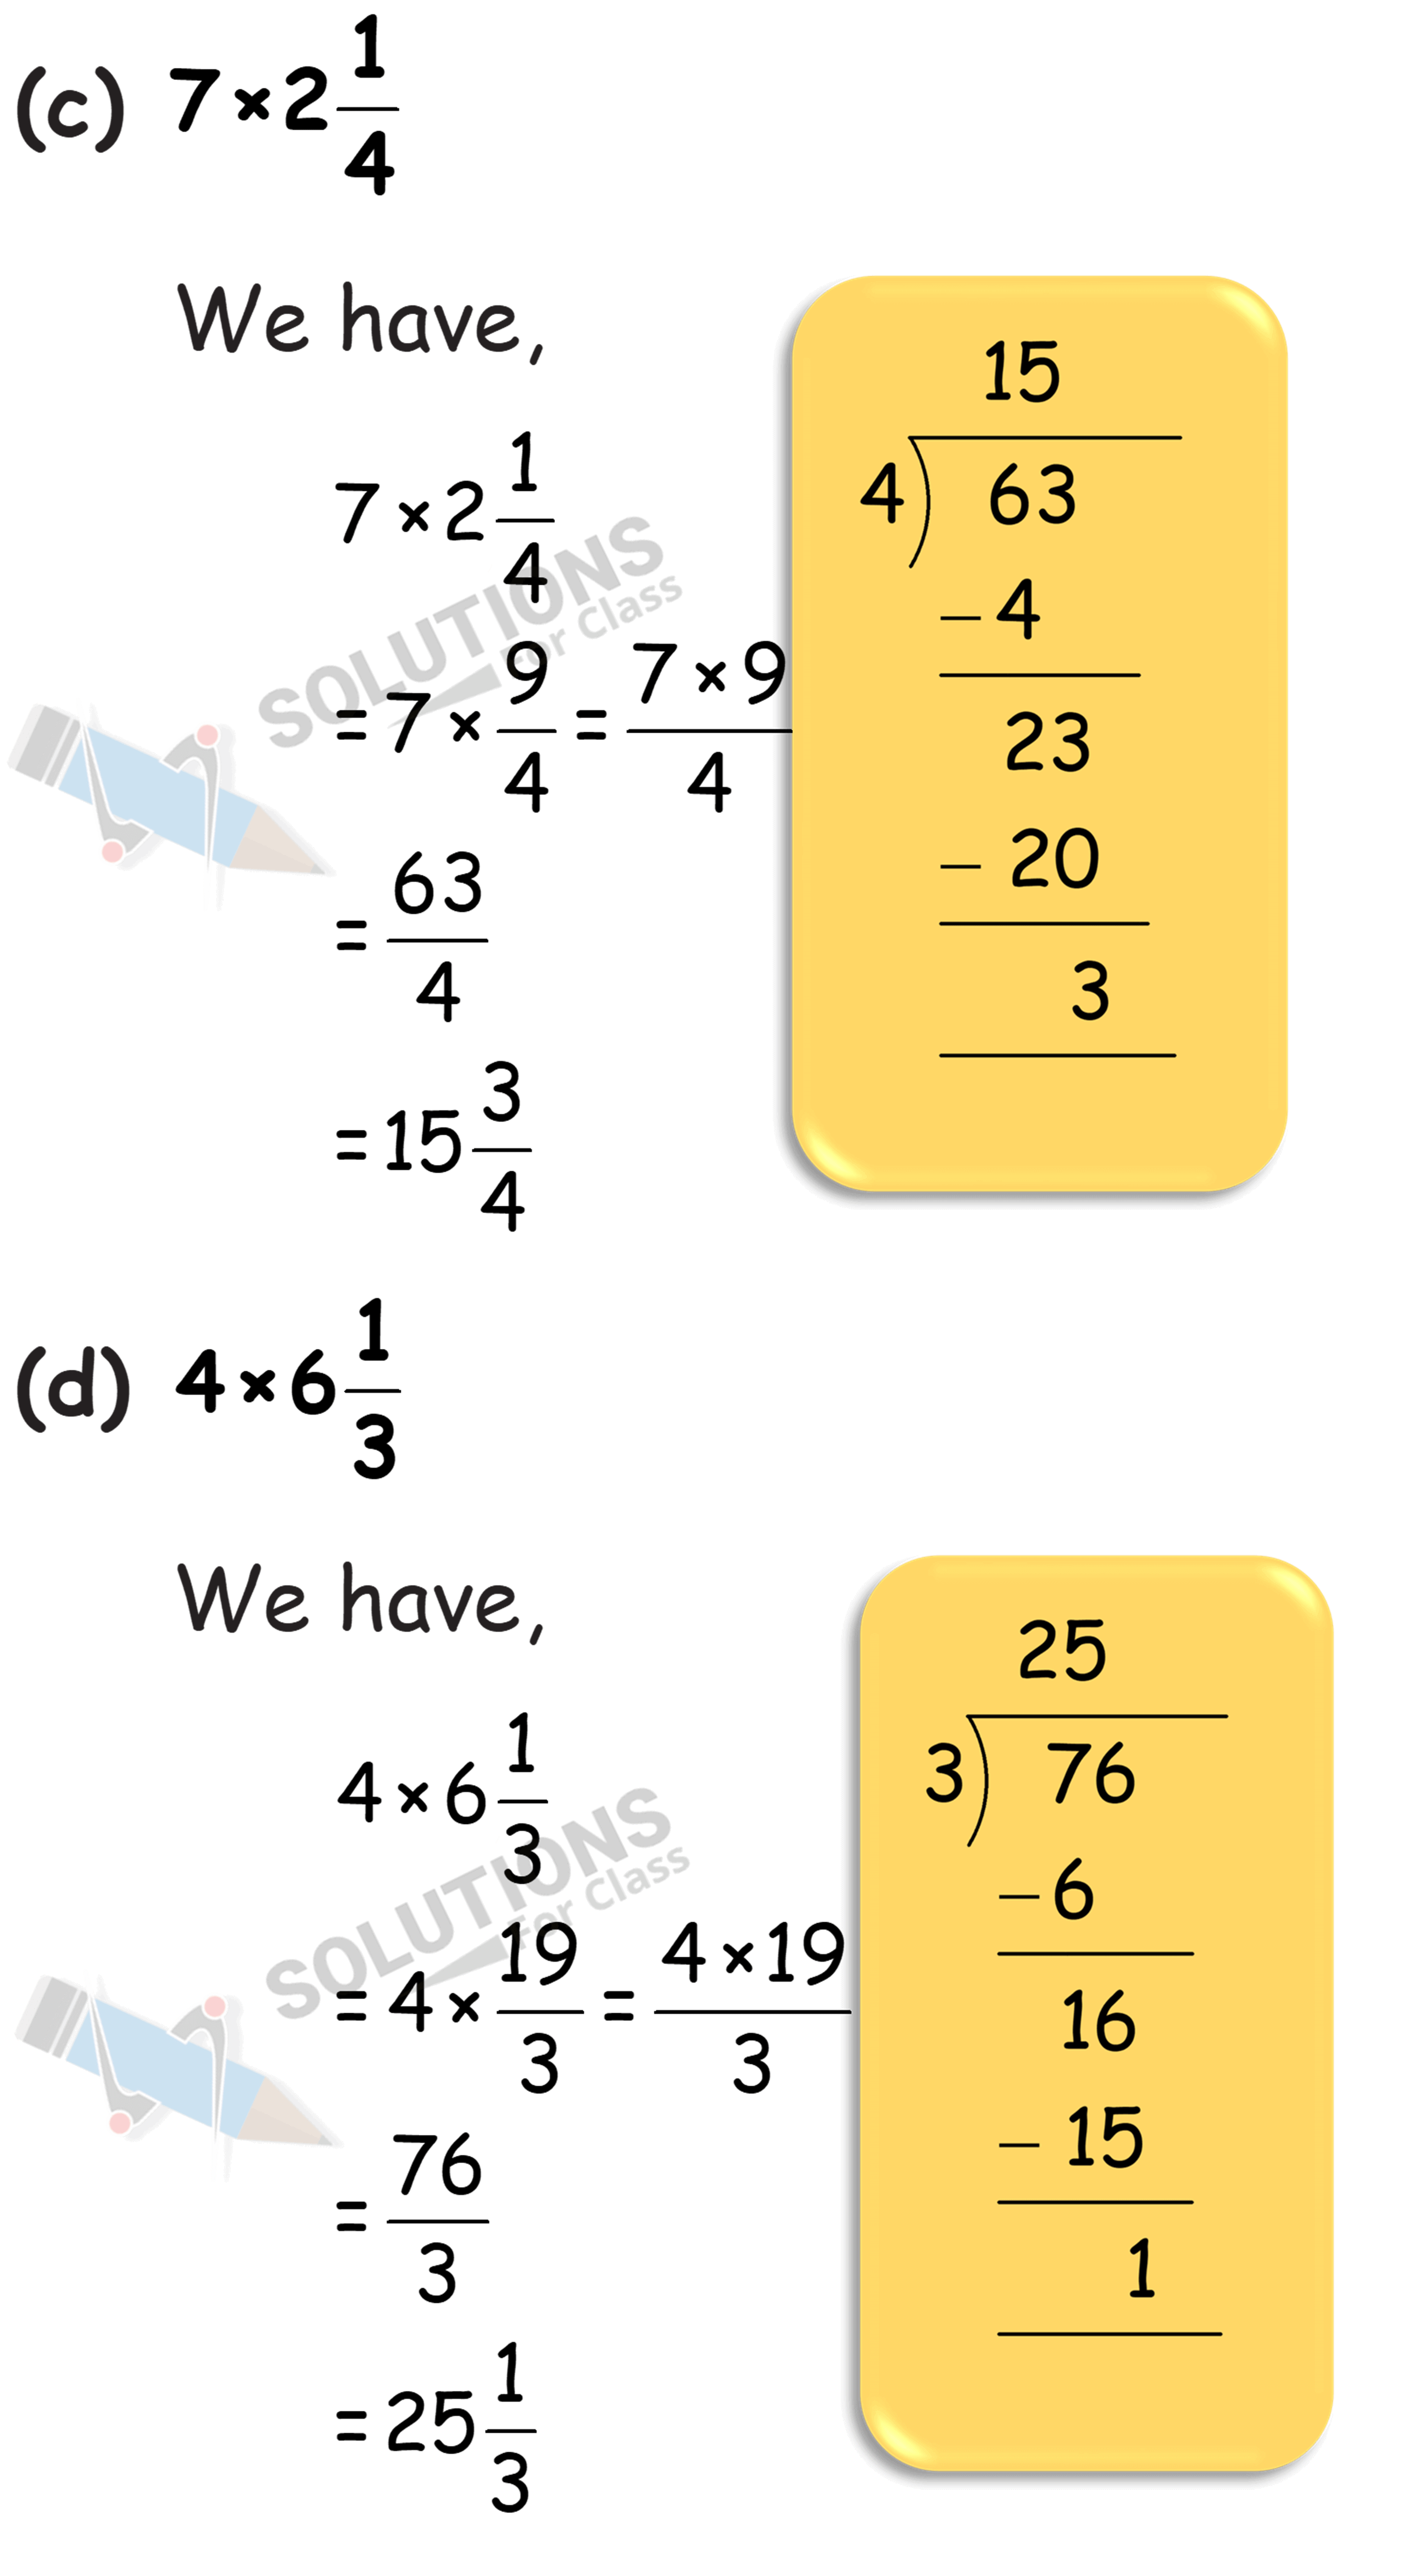 NCERT Solutions For Class 7 Chapter 2, Fractions and Decimals , Exercise 2.2, Q.6 (c-d)